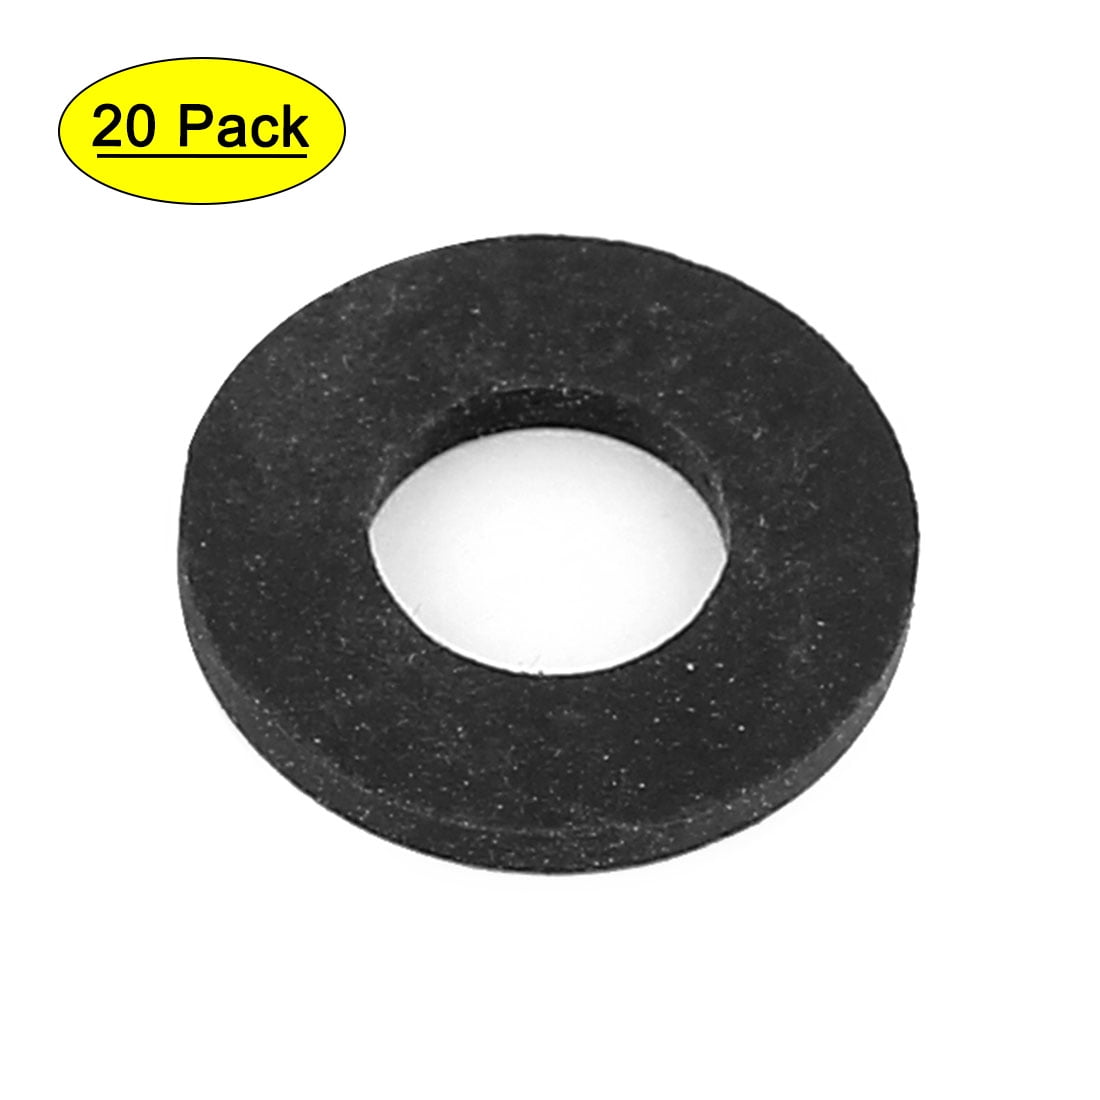 Seals Rubbers Washers Repair Kit Sinks Baths Shower Pipe Joints Connection Pump 